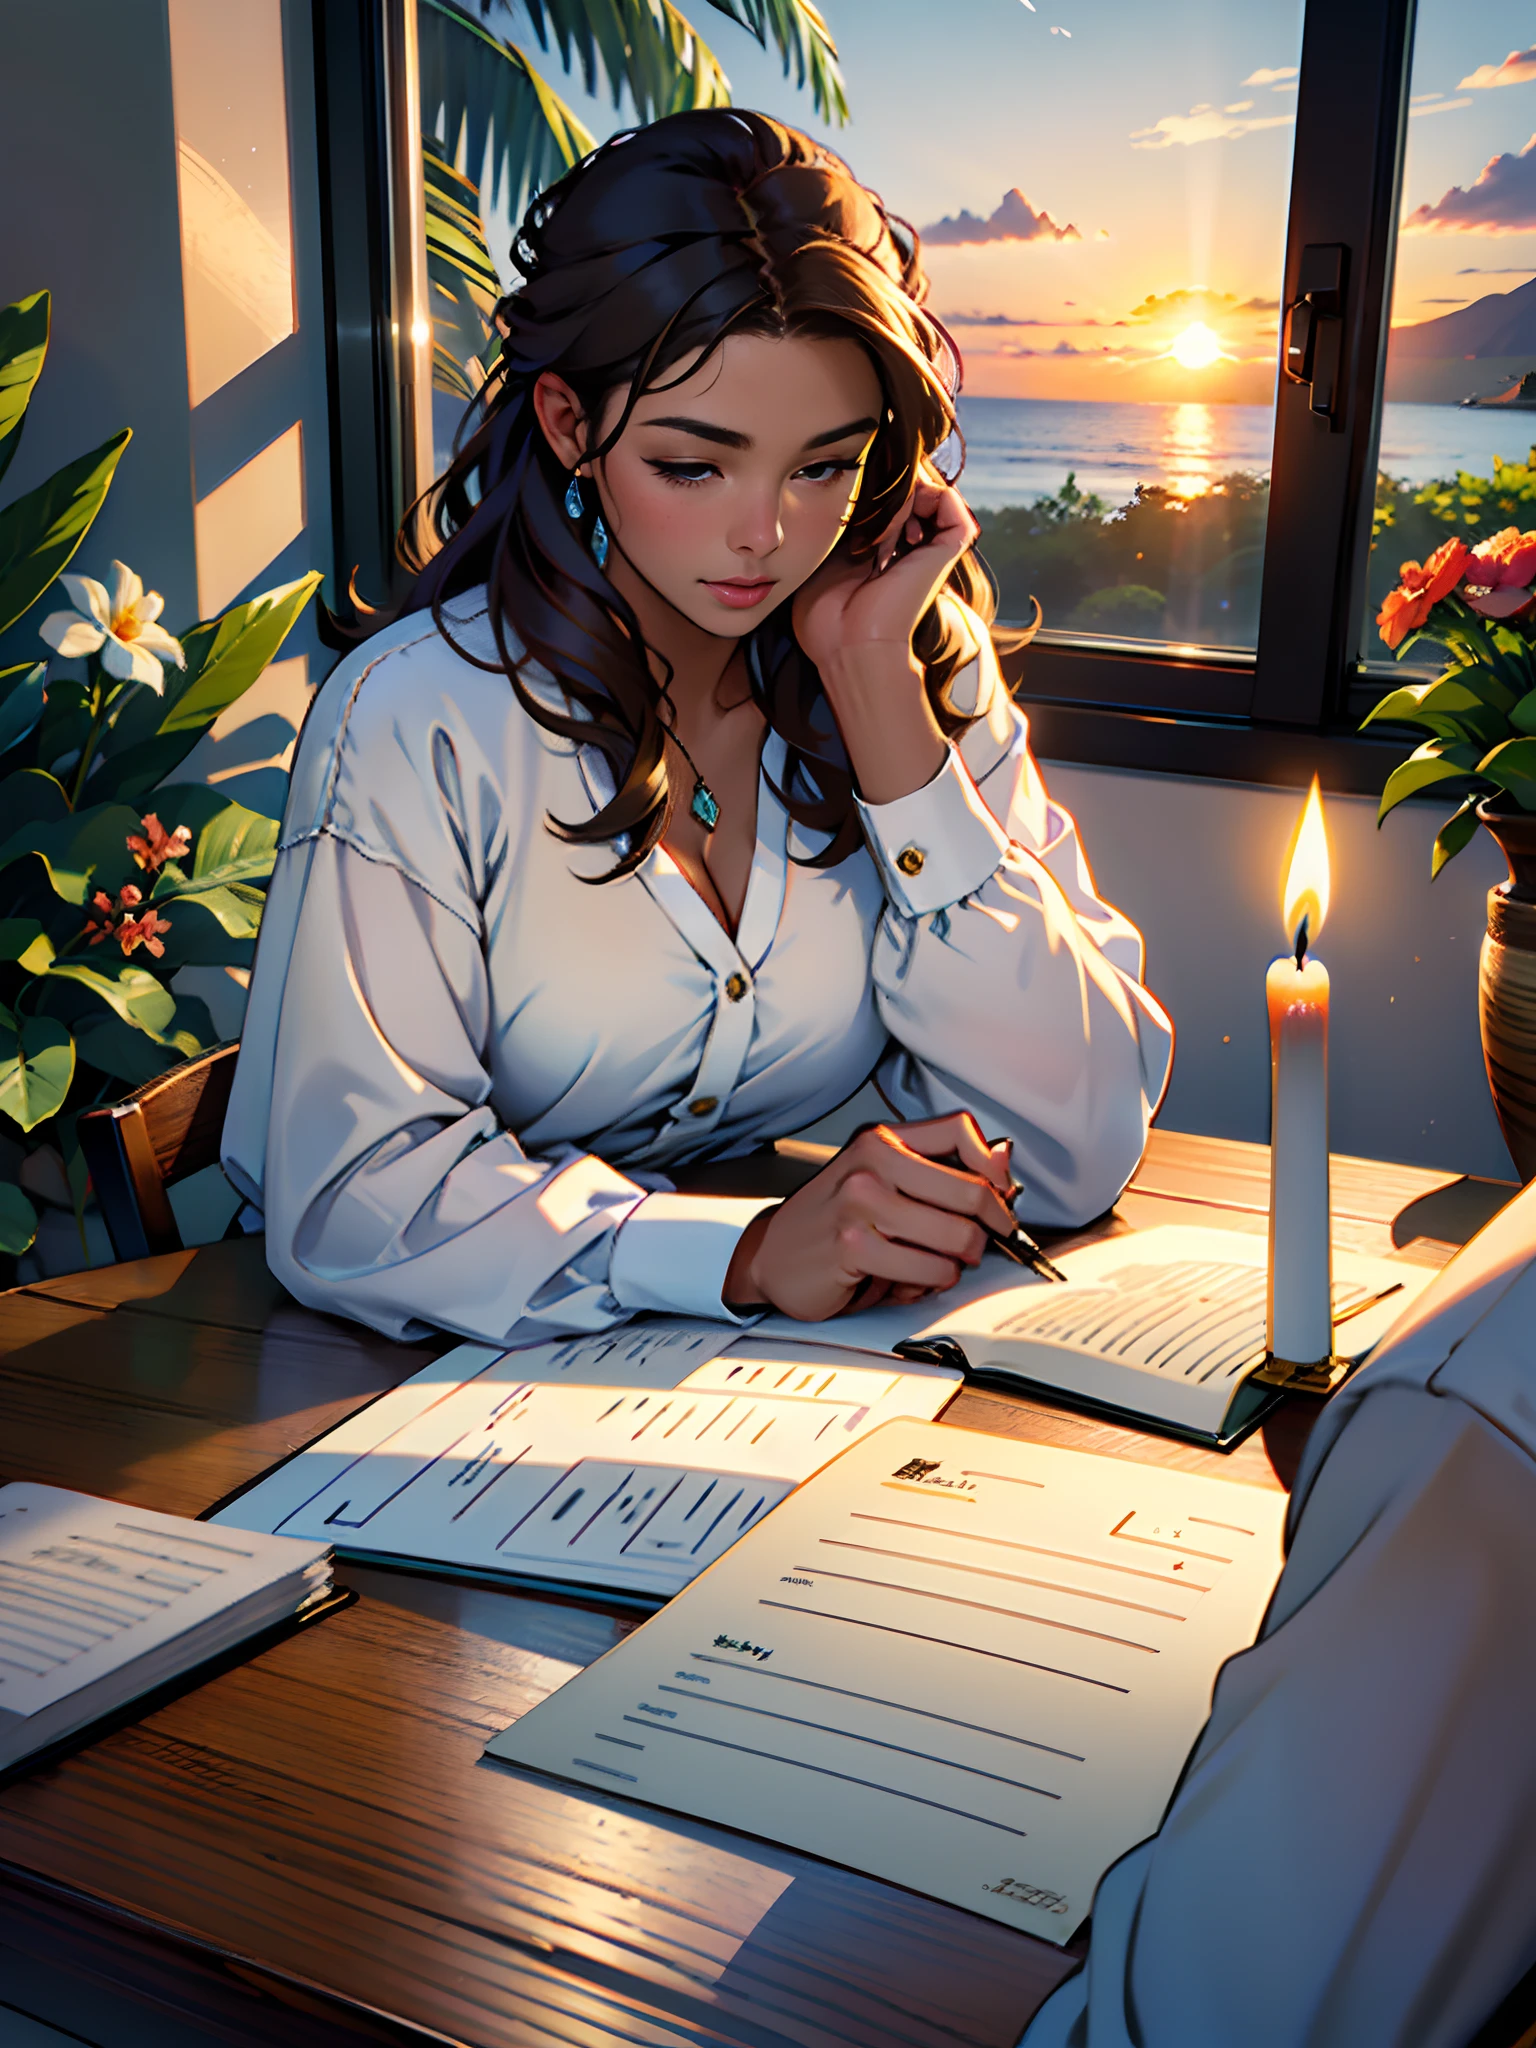 Beautiful woman with brown hair, fair skin, loose hair, sitting at the table, having a cup of coffee, writing in a notebook. On the table has a candle accesses, a cup of coffee, some flowers. Through the window it is possible to observe the sunset Hawaii Lahaina illuminates the whole environment.